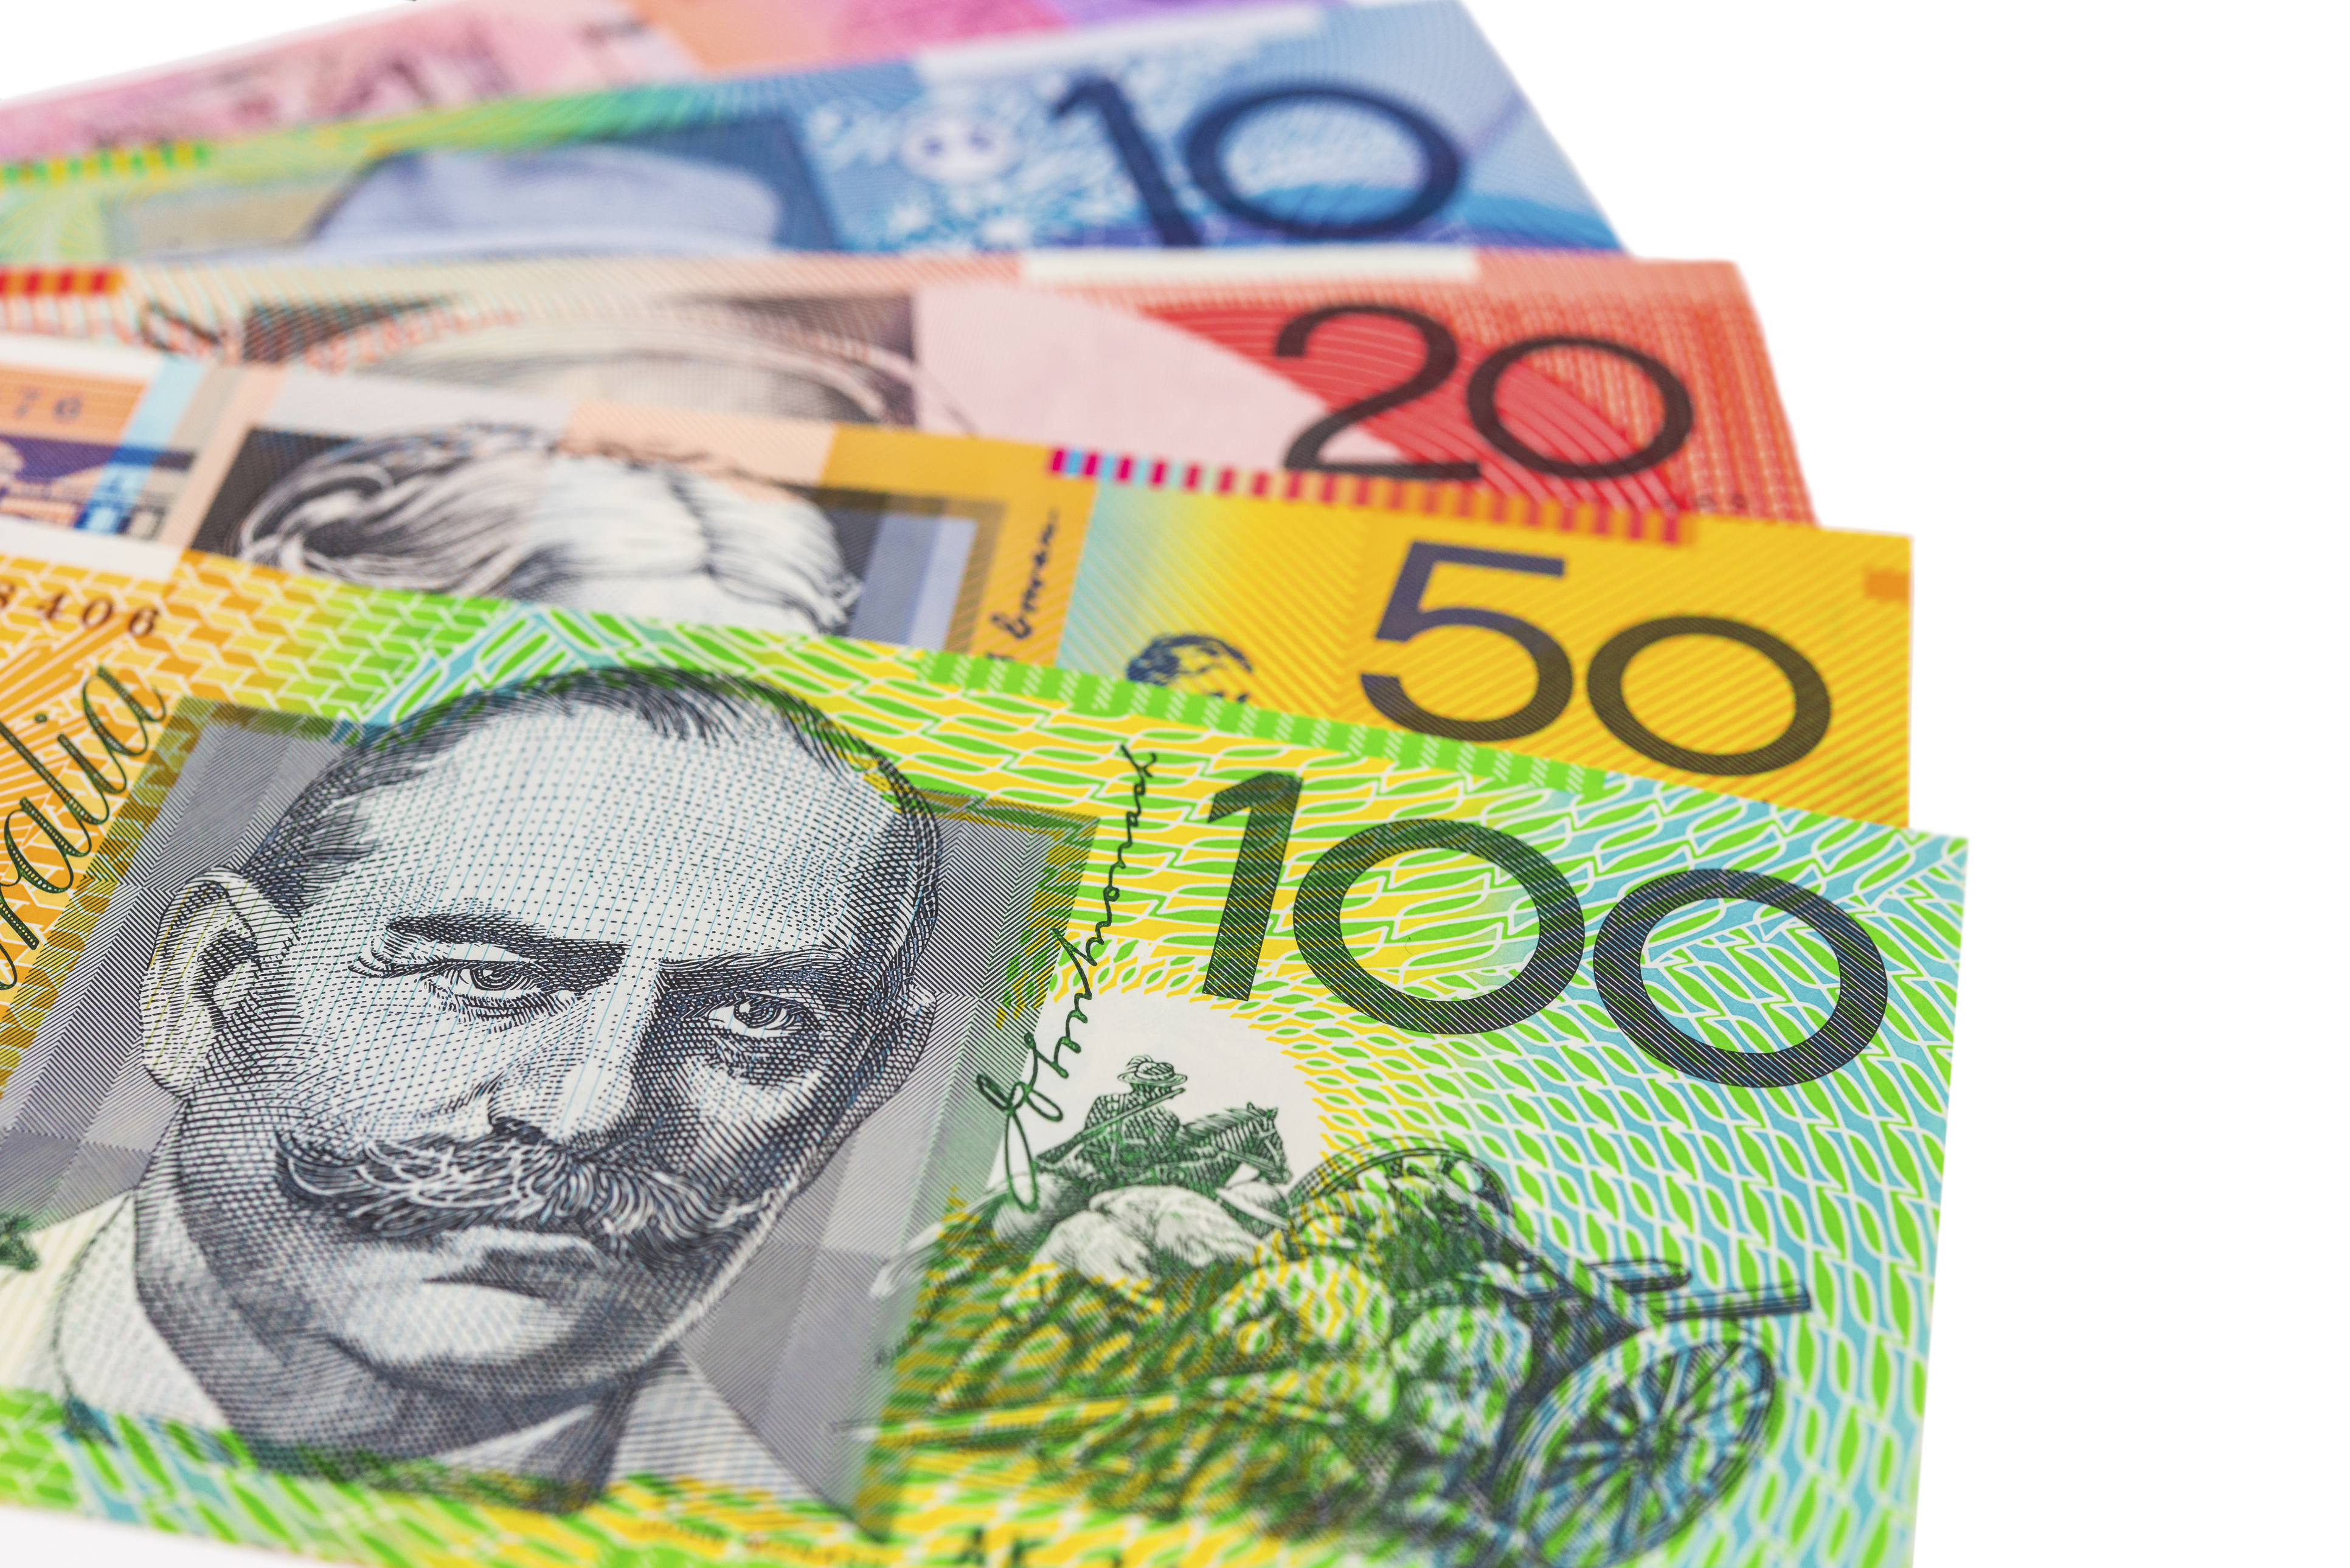 Aussie dollar to keep falling - but how low can it get?